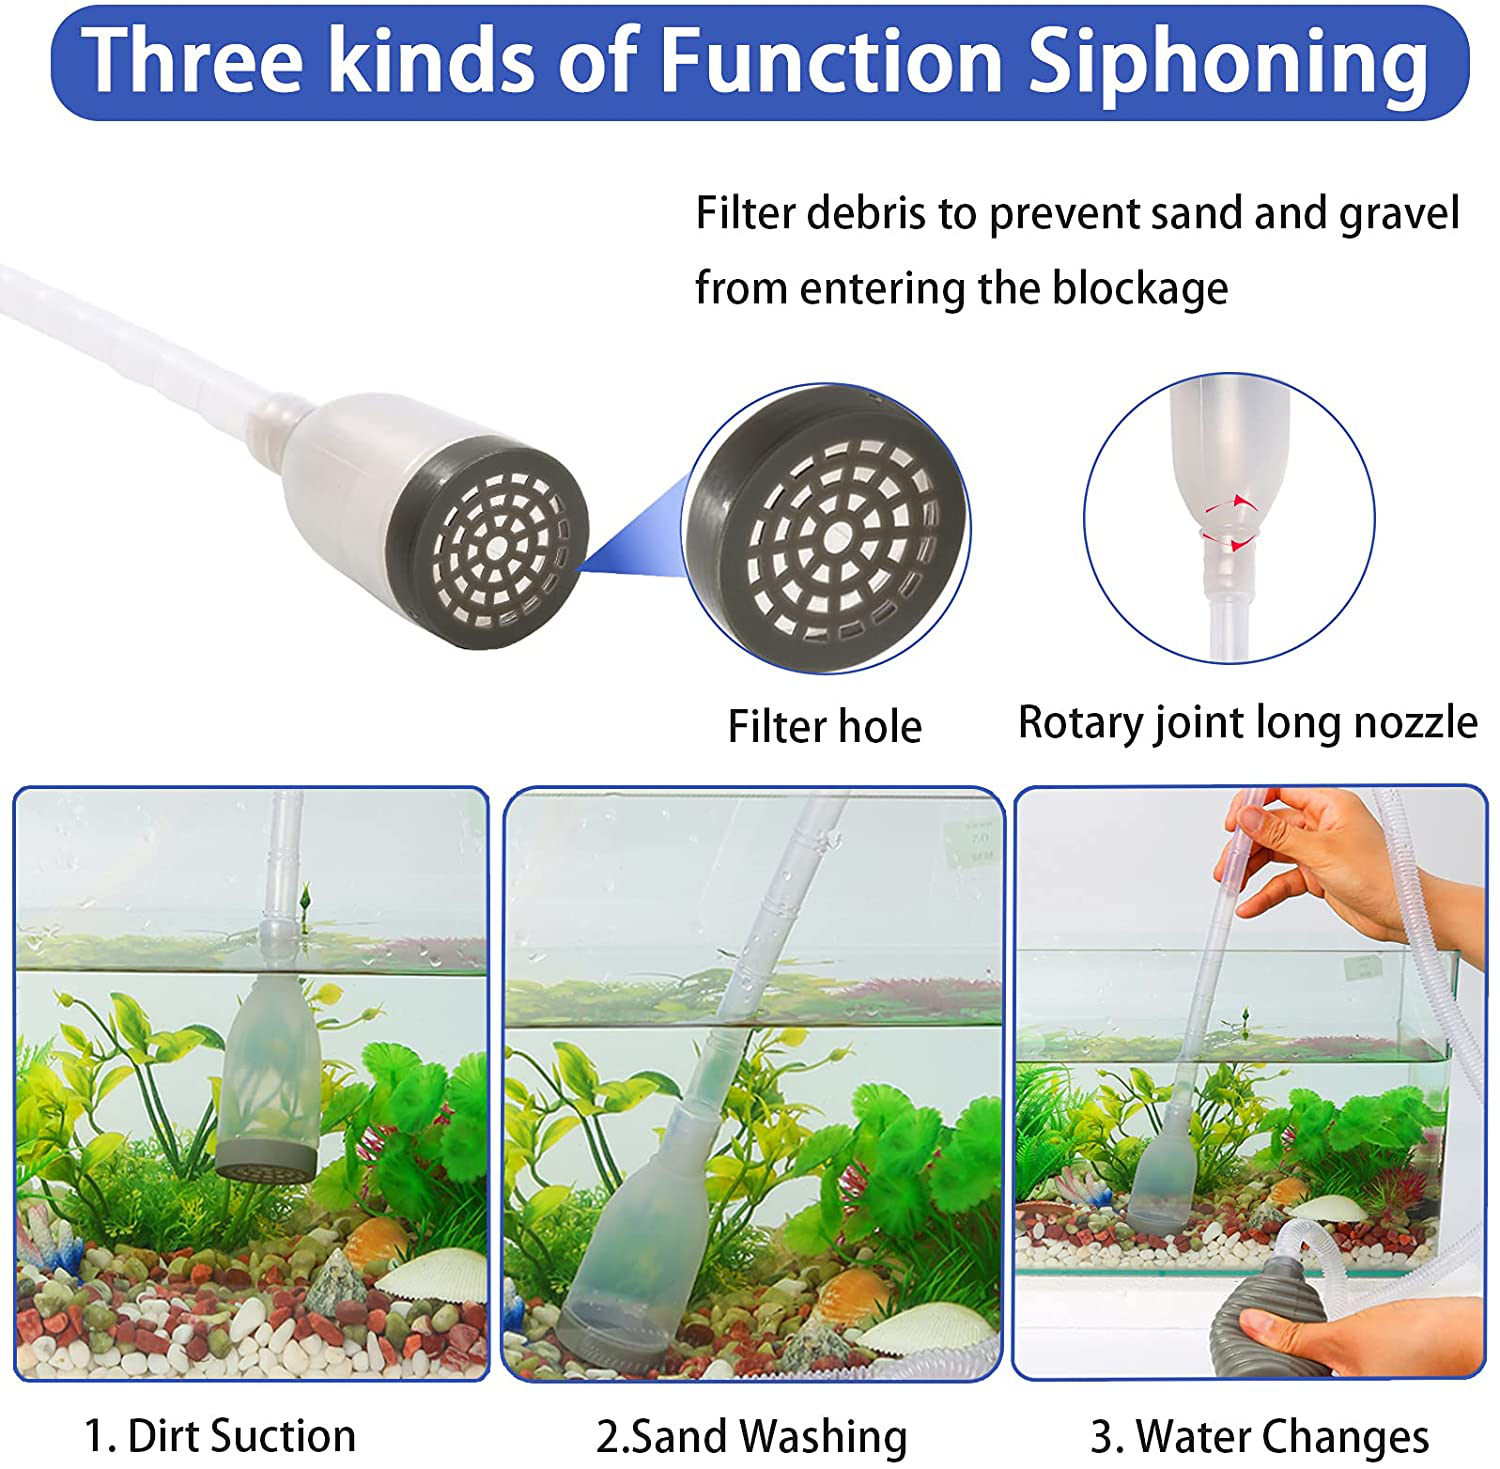 Fish Tank Cleaning Tools, Aquarium Gravel Cleaner Siphon Fish Tank Vacuum Cleaner, Algae Scrapers Set 5 in 1 Fish Tank Gravel Cleaner, Siphon Vacuum for Water Changing and Sand Cleaner (20-65 Gal)